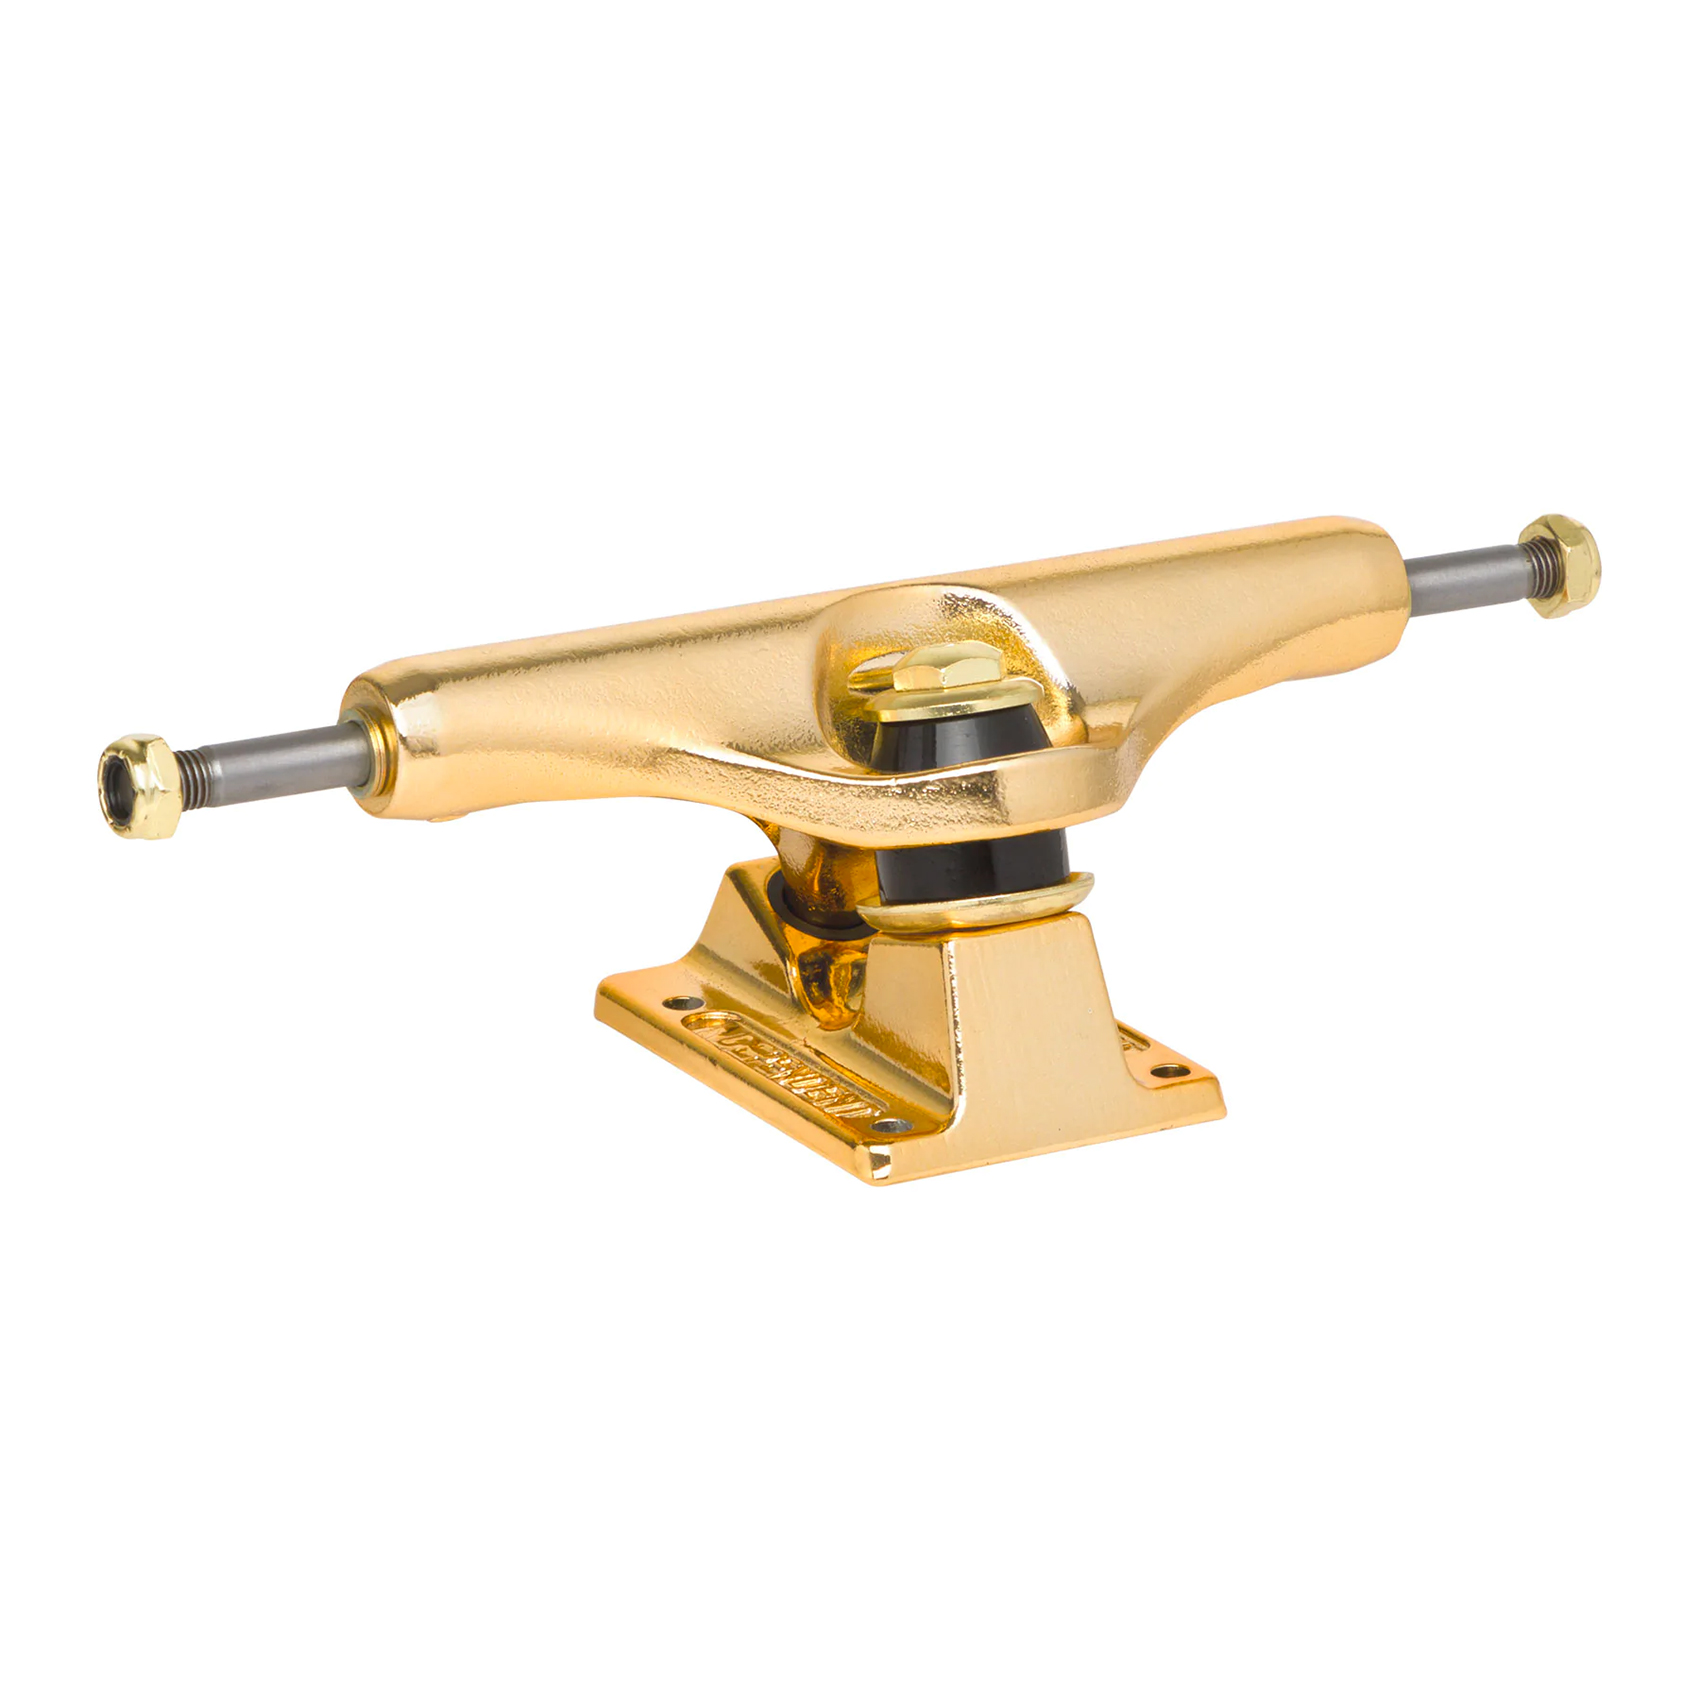 Independent x Primitive Skateboardachse Stage 11 Gold Mid 159mm